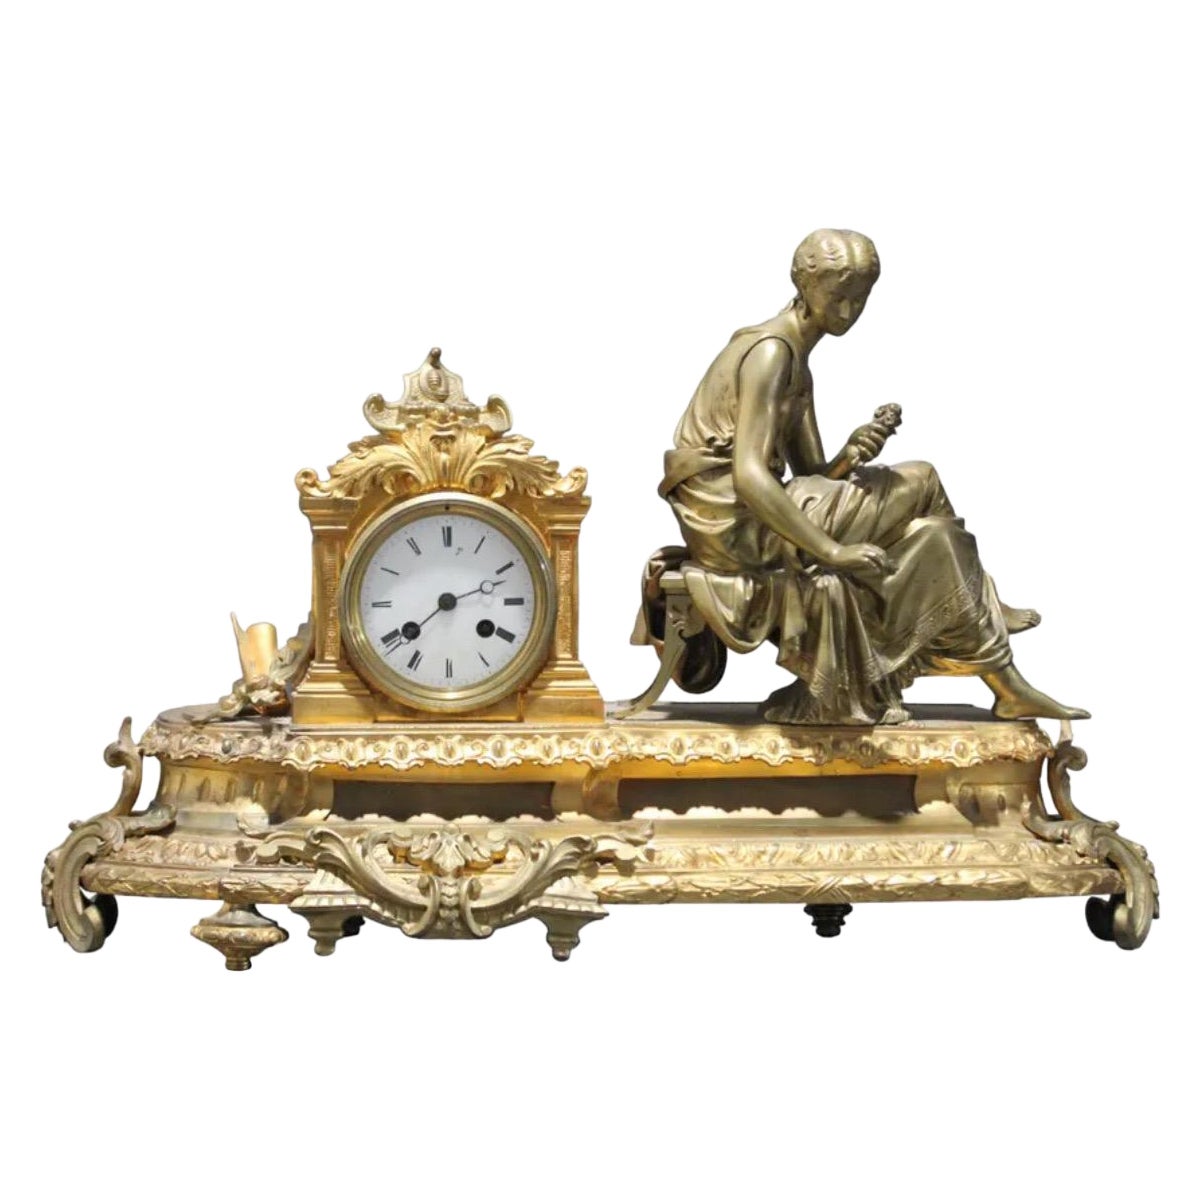 Exceptional Antique French Bronze Clock 1860-1890s